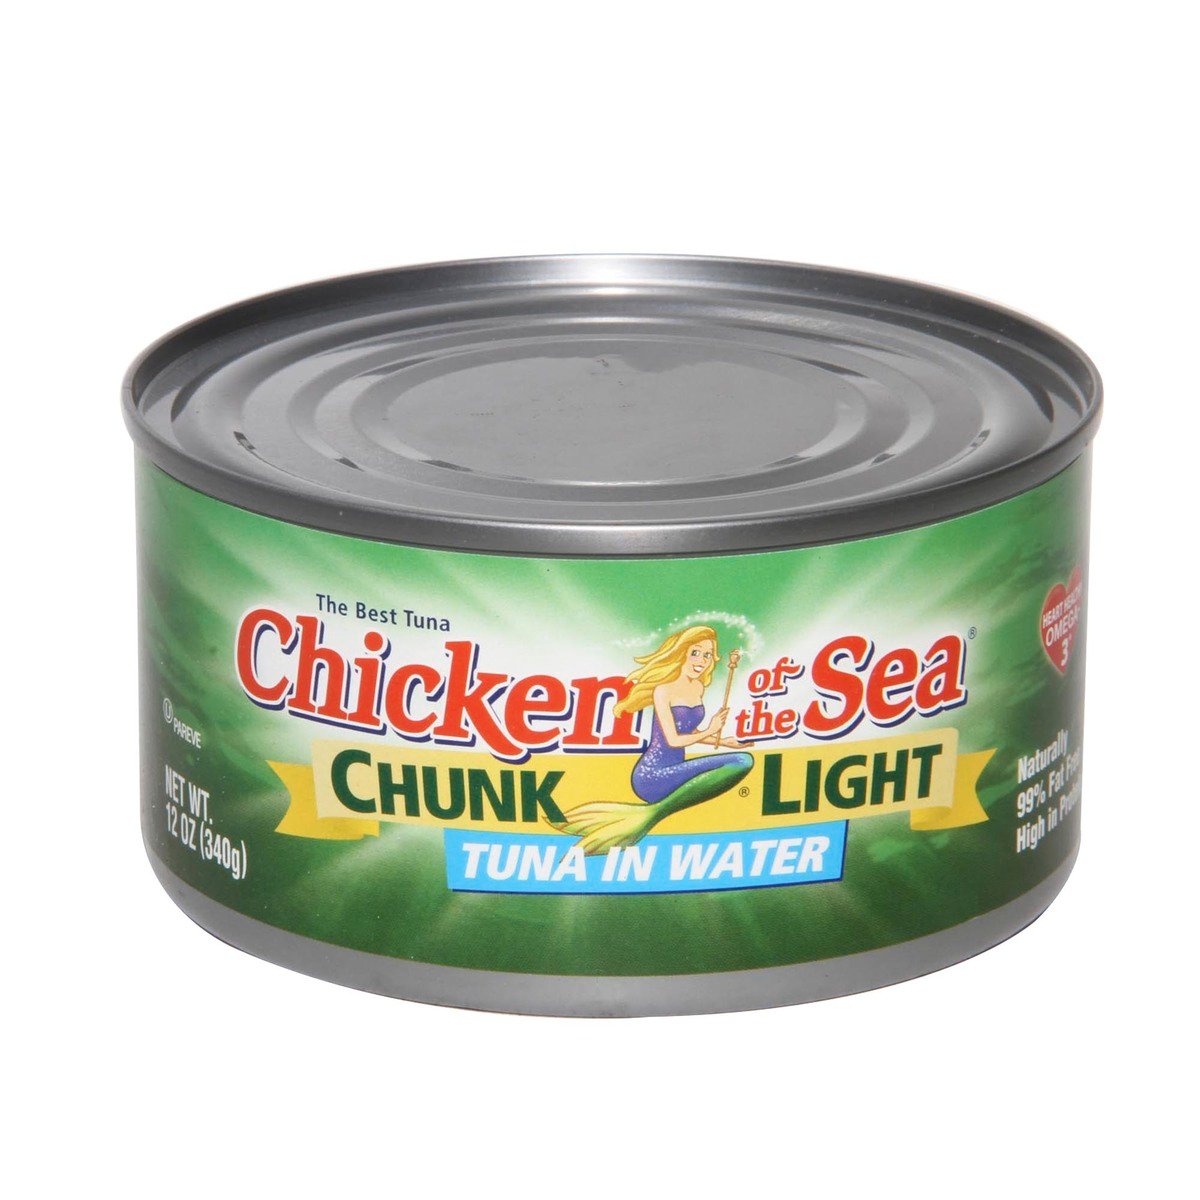 Buy Chicken of the Sea Chunk Light Tuna in Water 340g Online at Best Price | Canned Tuna | Lulu Kuwait in Kuwait